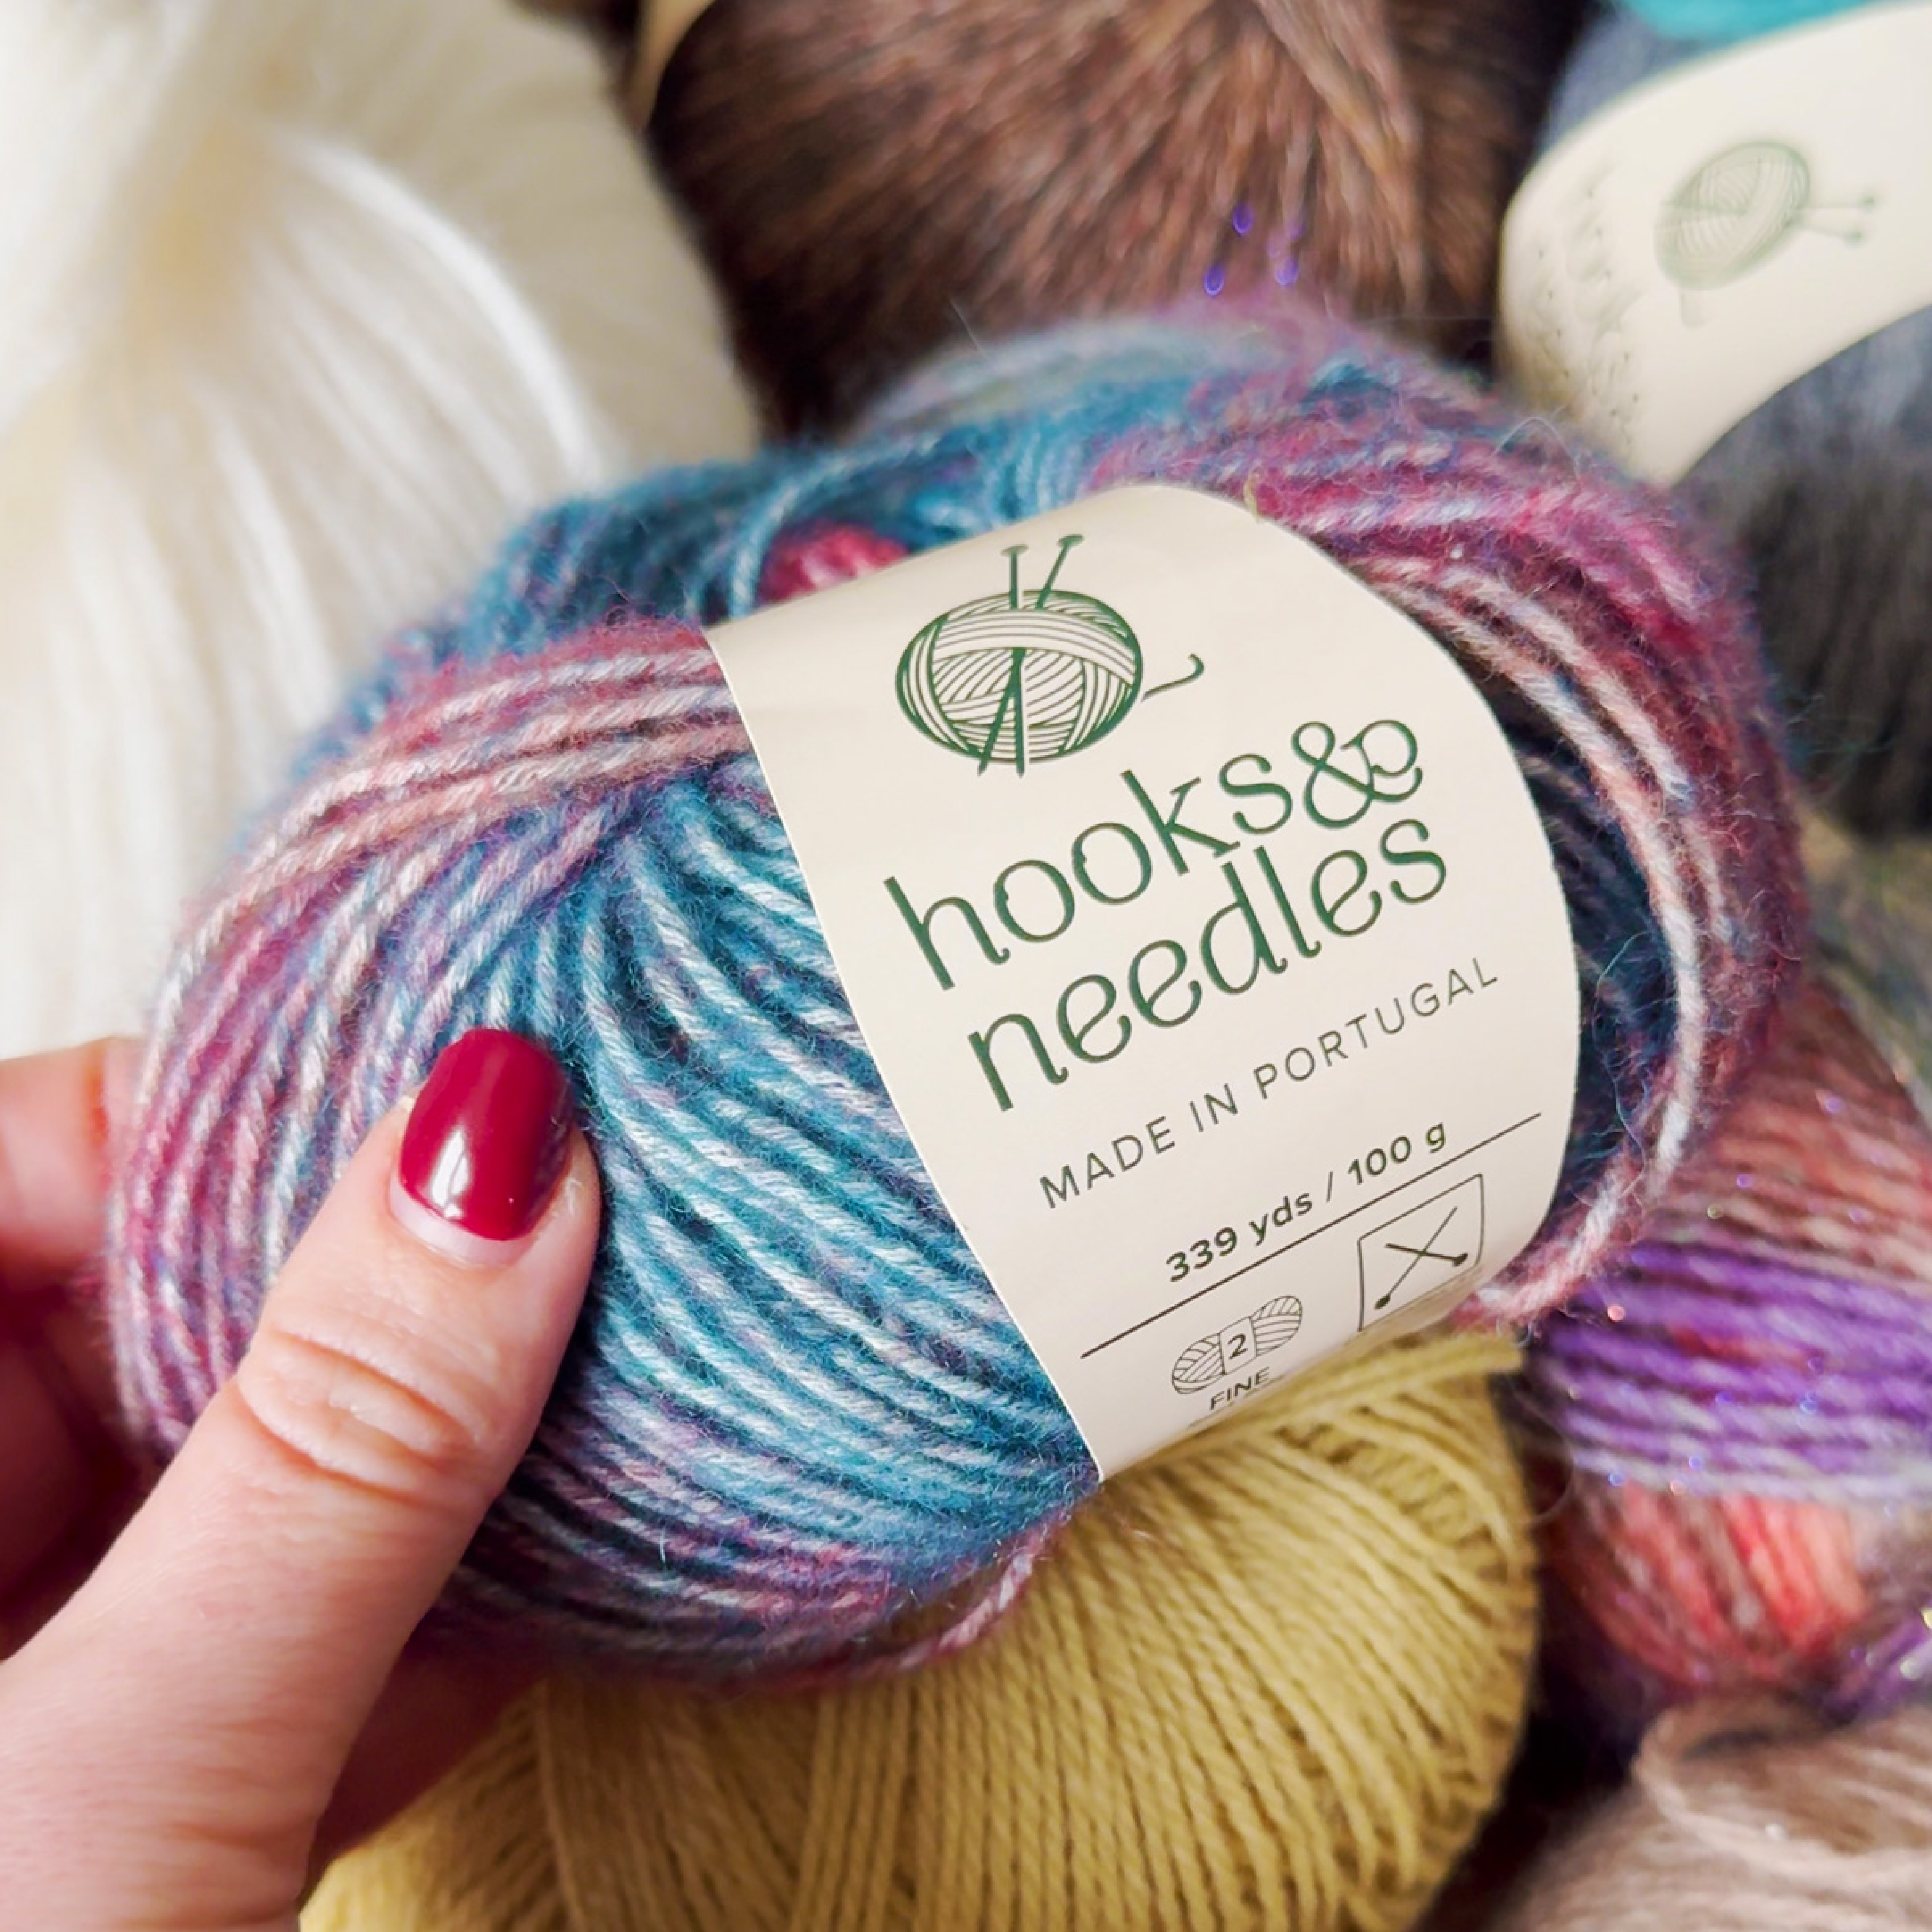 A close-up of a hand holding a skein of multicolored yarn with a label indicating the brand "1-Month-Prepaid Hooks & Needles Subscription Box #19," made in Portugal.